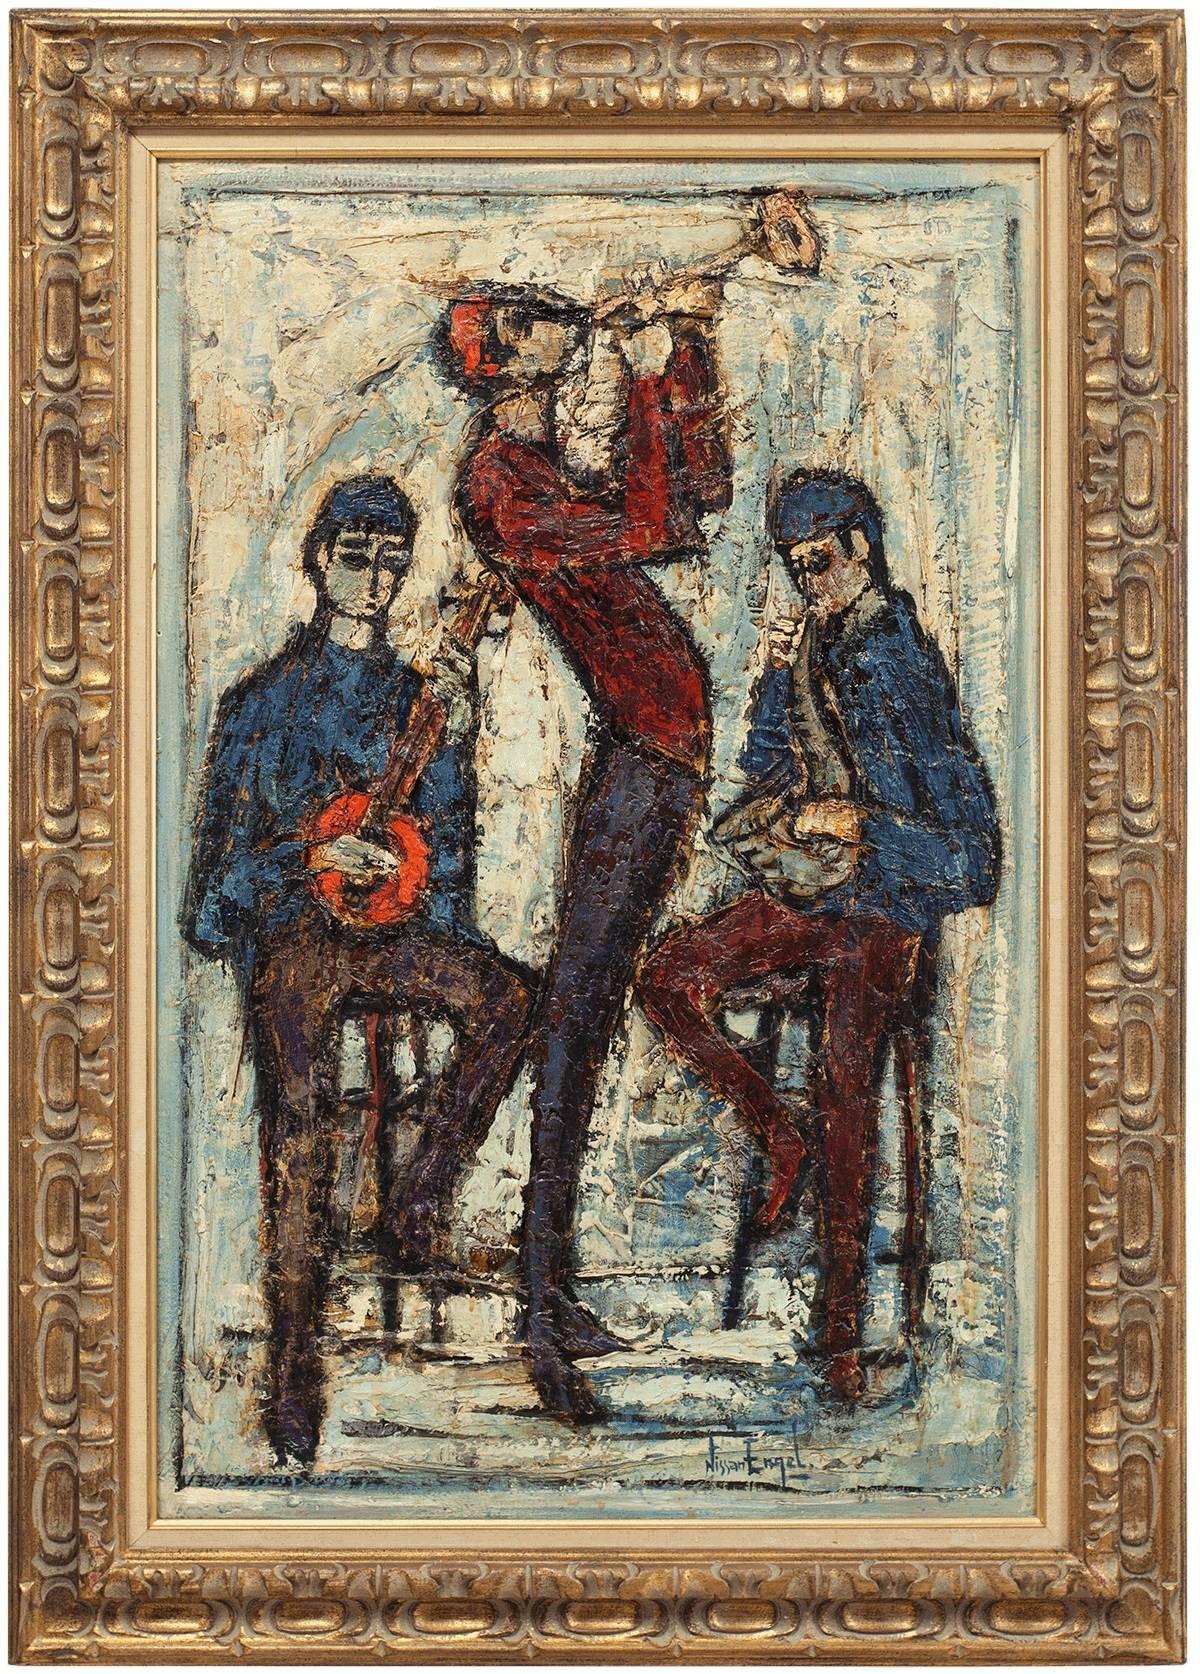 Genre: Modern
Subject: Music
Medium: Oil
Surface: Board
Country: France
Dimensions: 36.5